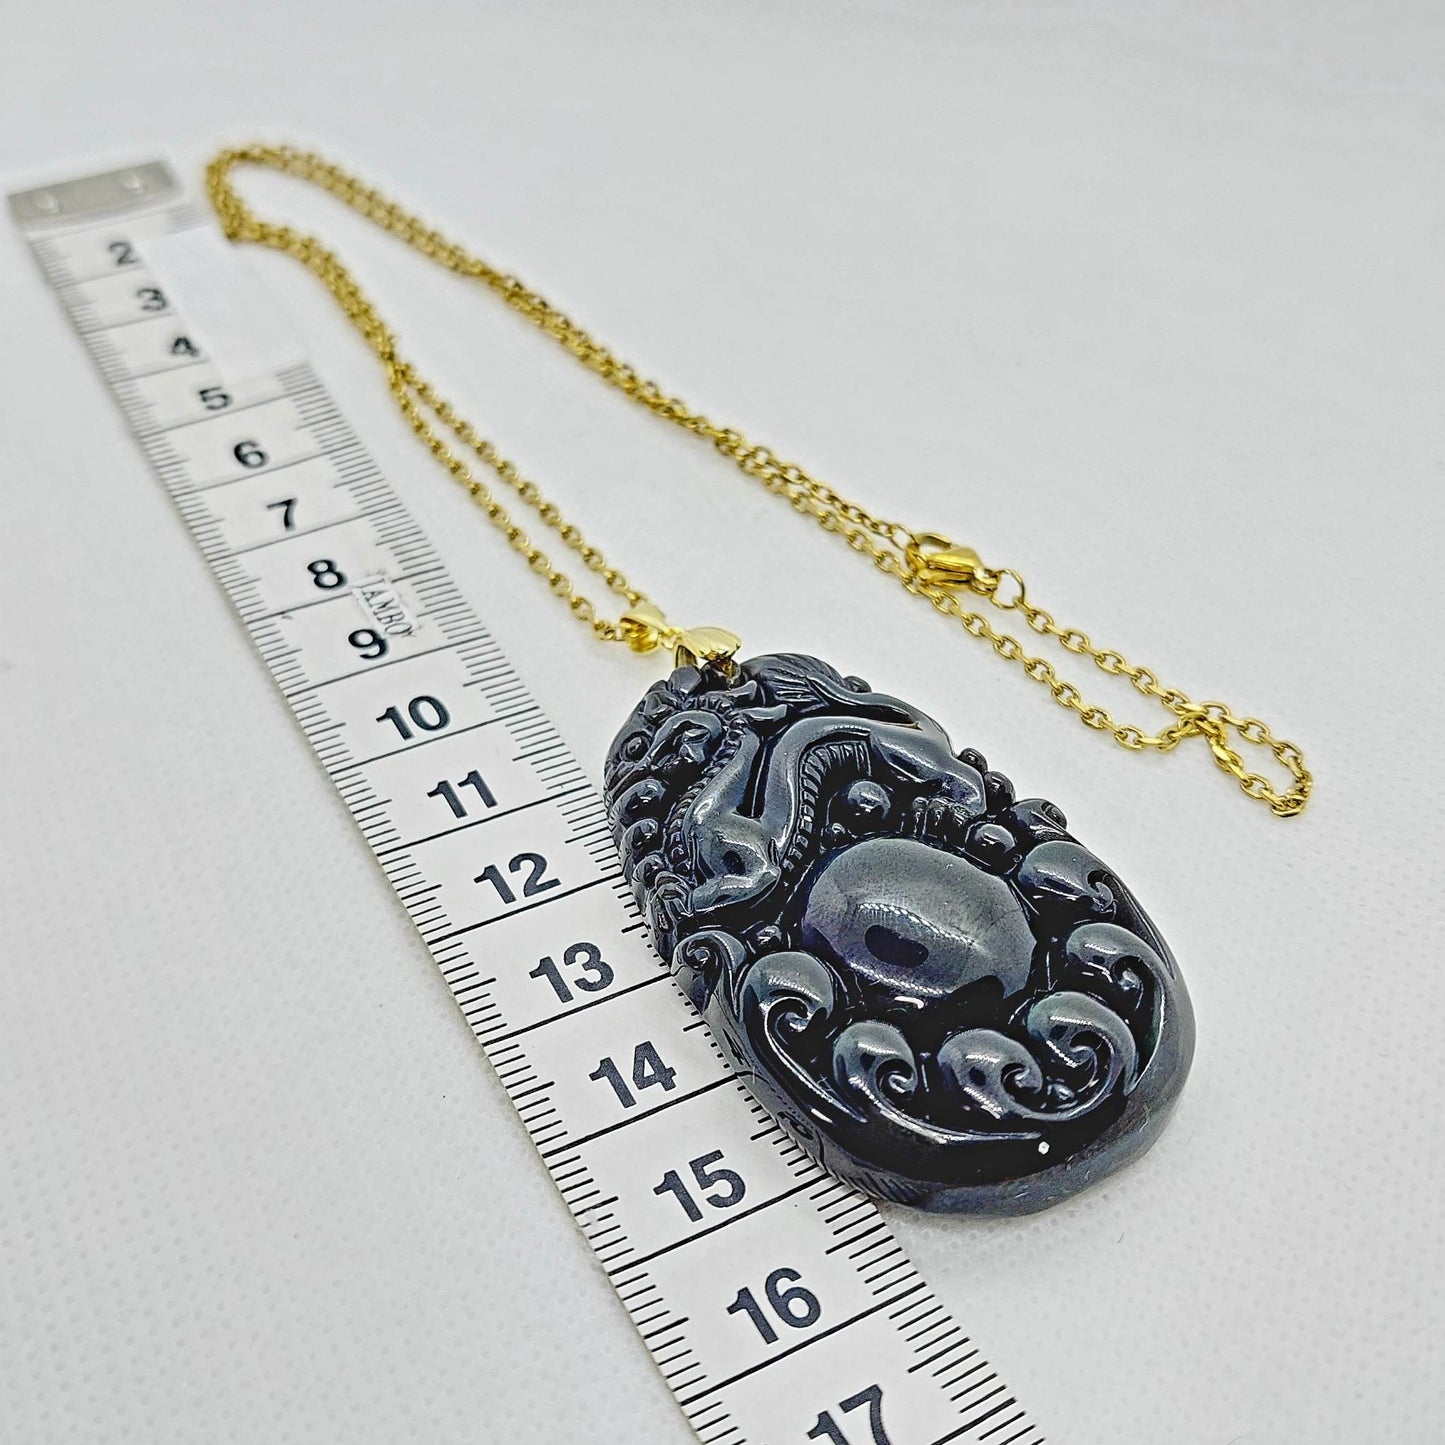 Natural Obsidian Dragon Pendant - Stainless Steel Gold Plated Chain Necklace